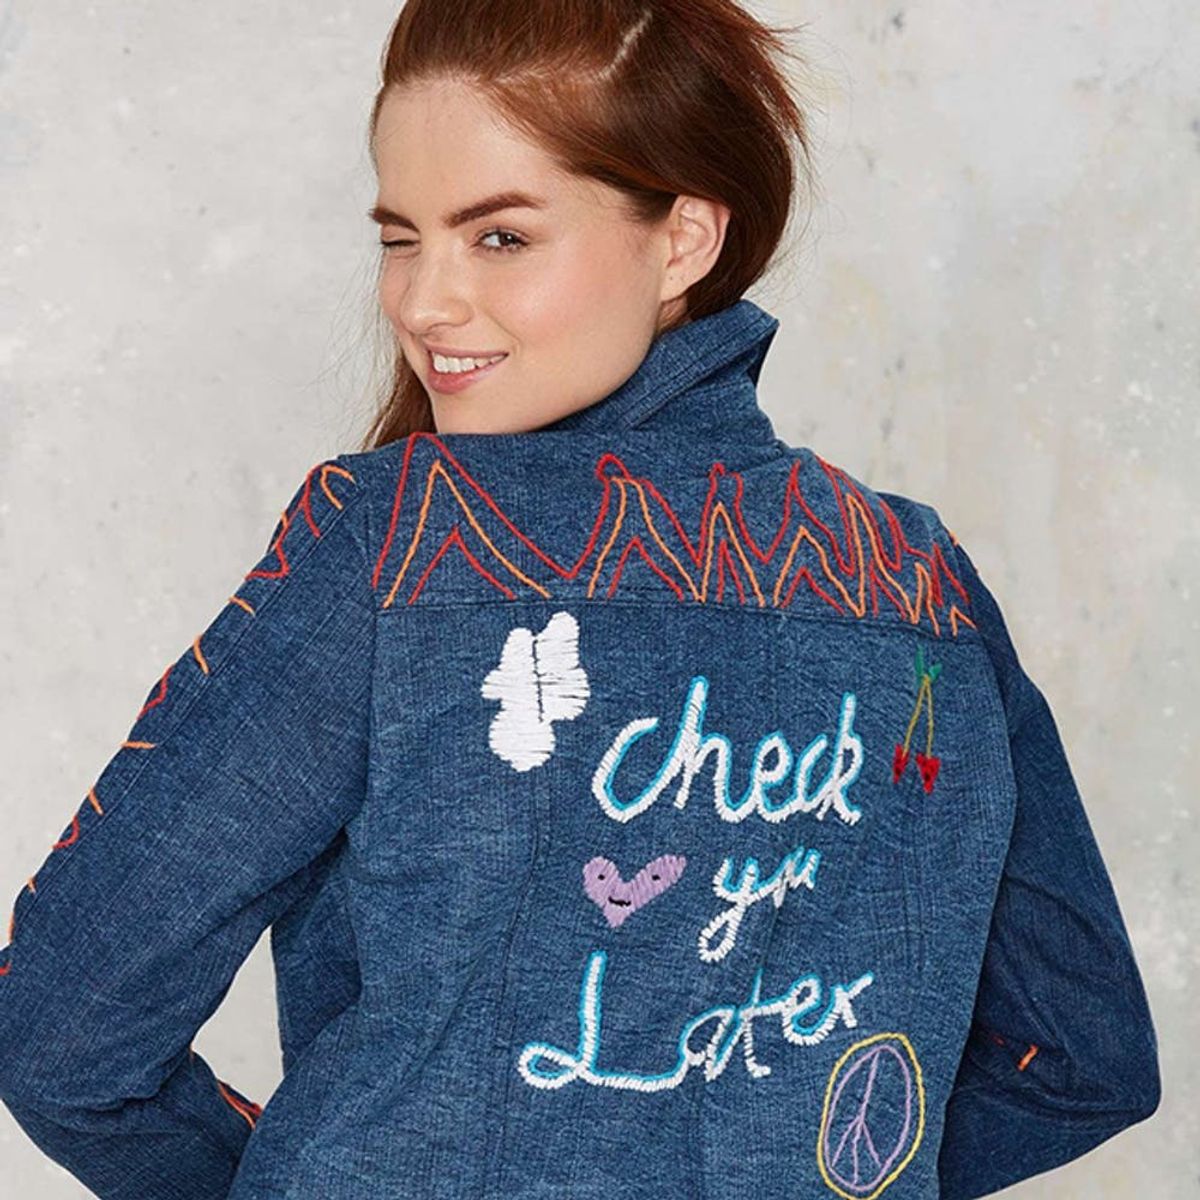 12 Clothes That Prove Embroidery Is the Coolest DIY-Inspired Trend